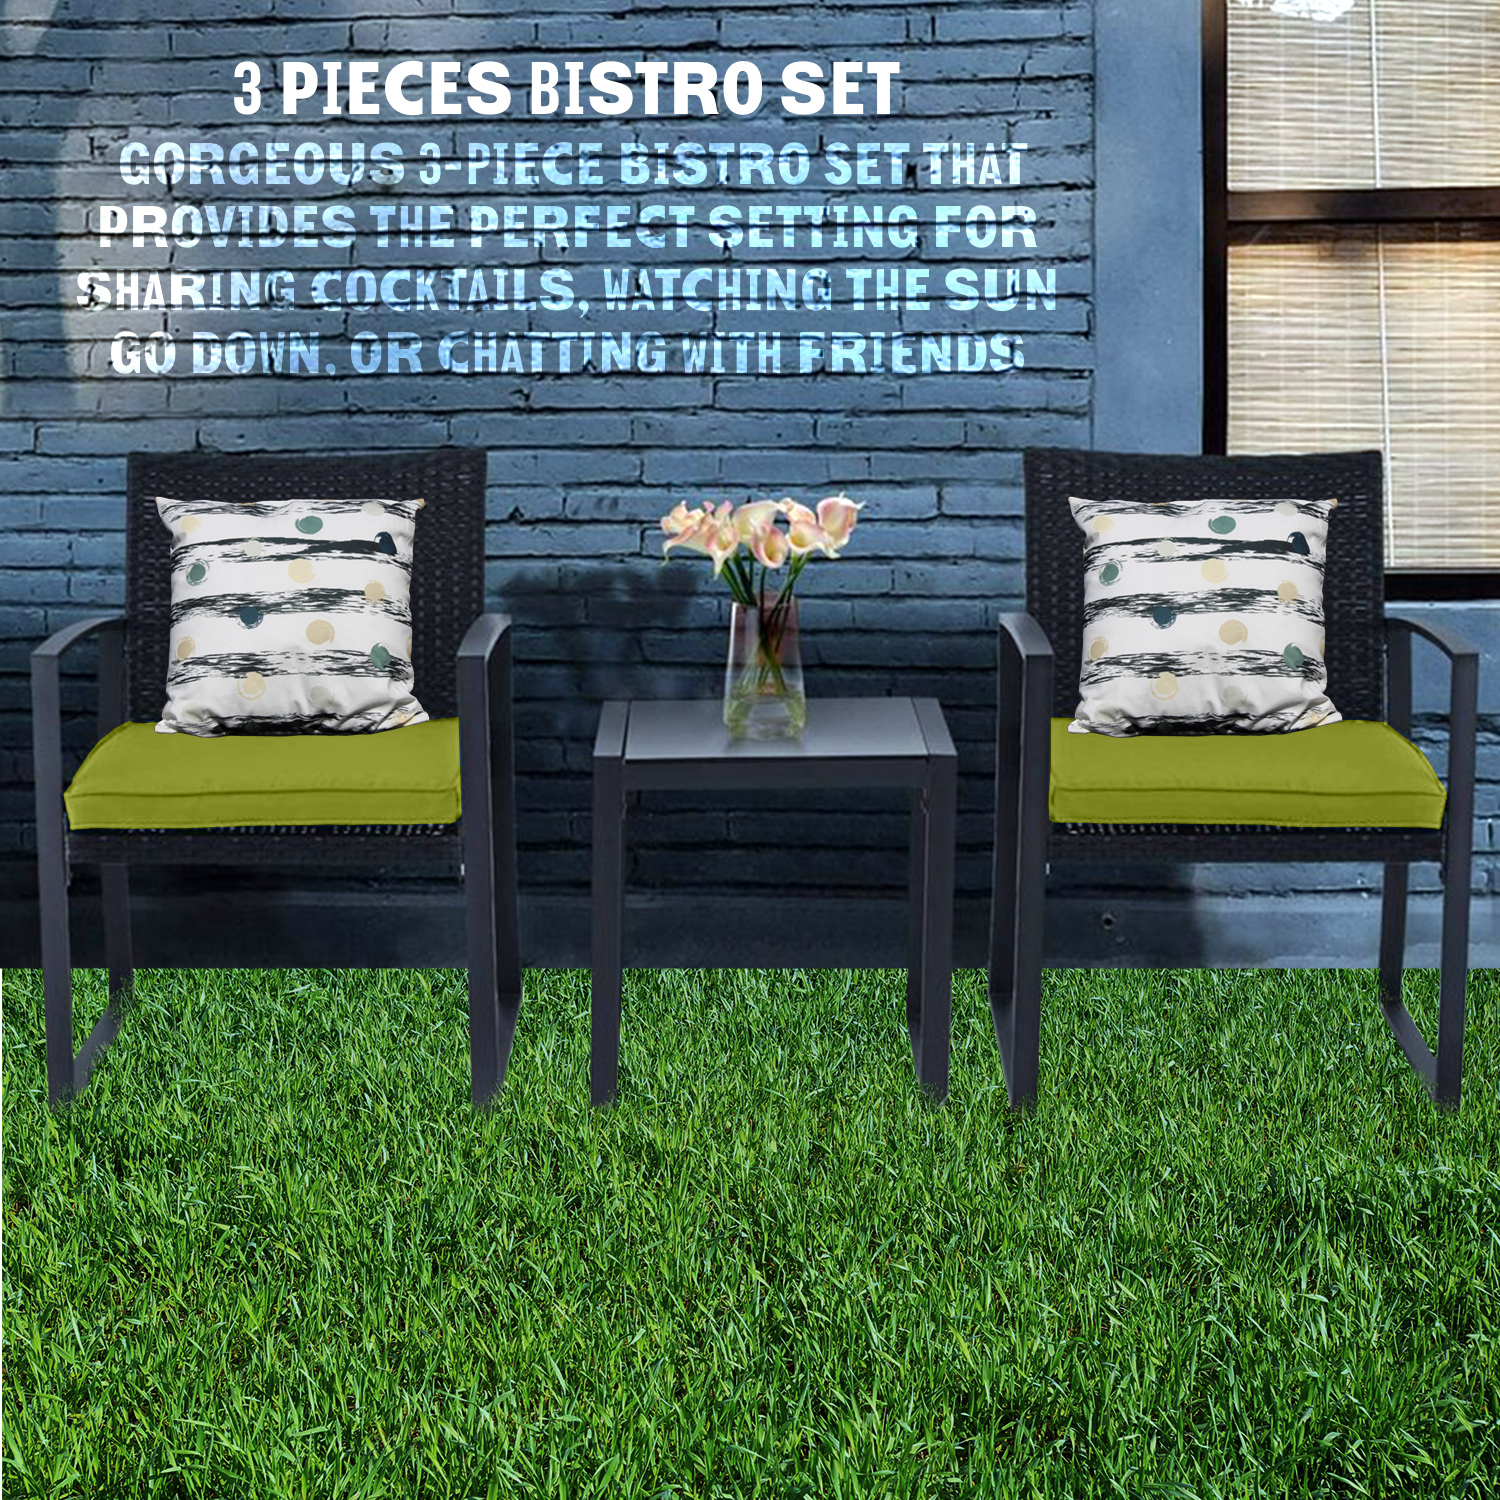 Outdoor 3-Piece Dialog Bistro Set Black Wicker Furniture-Two Chairs with Glass Coffee Table Green - image 4 of 7